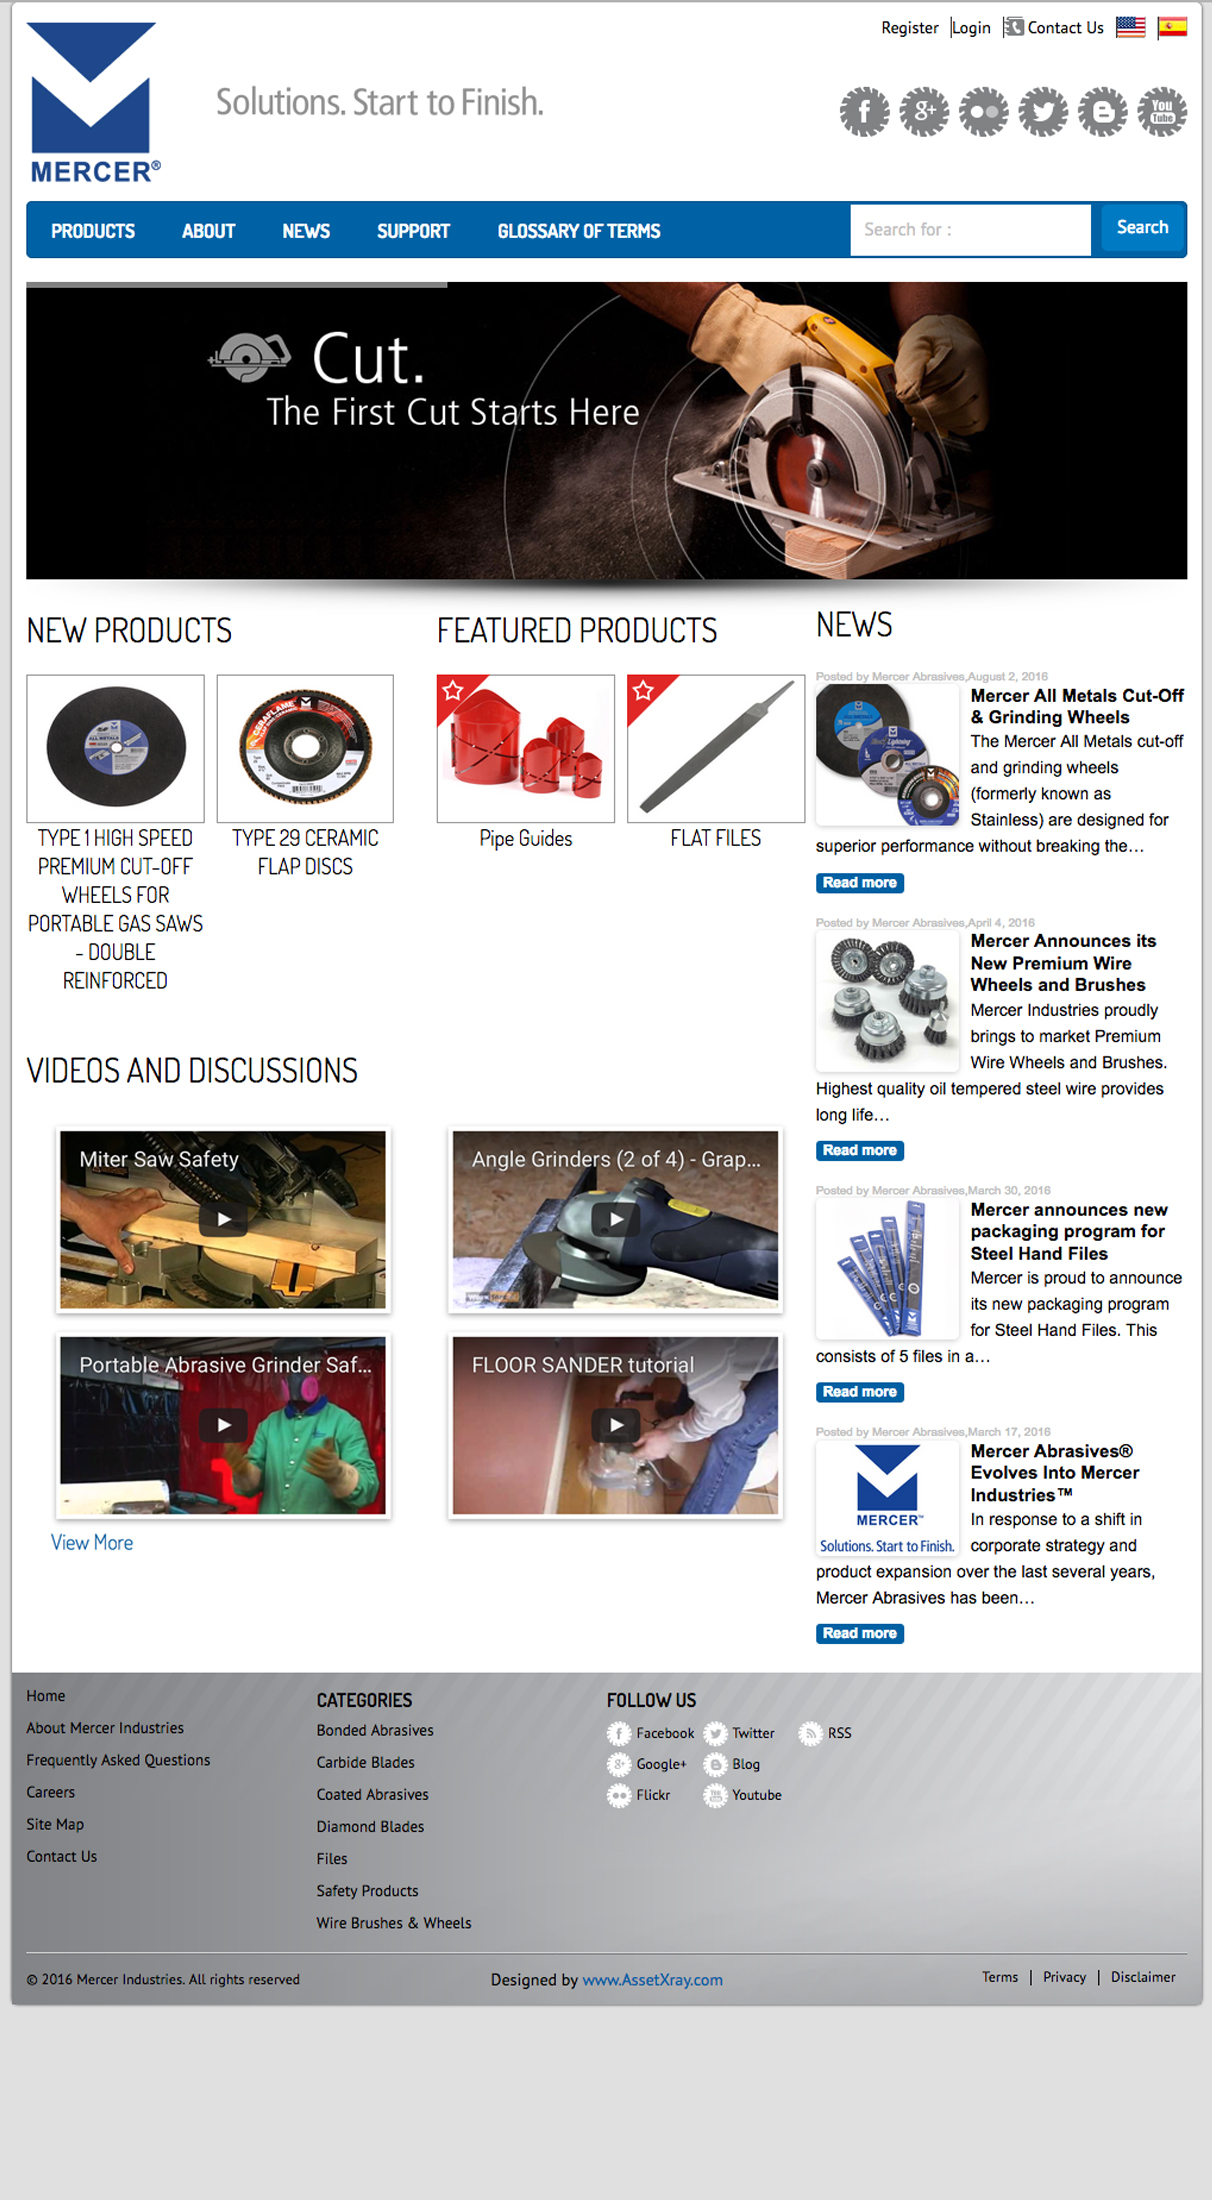 Mercer Industries home page